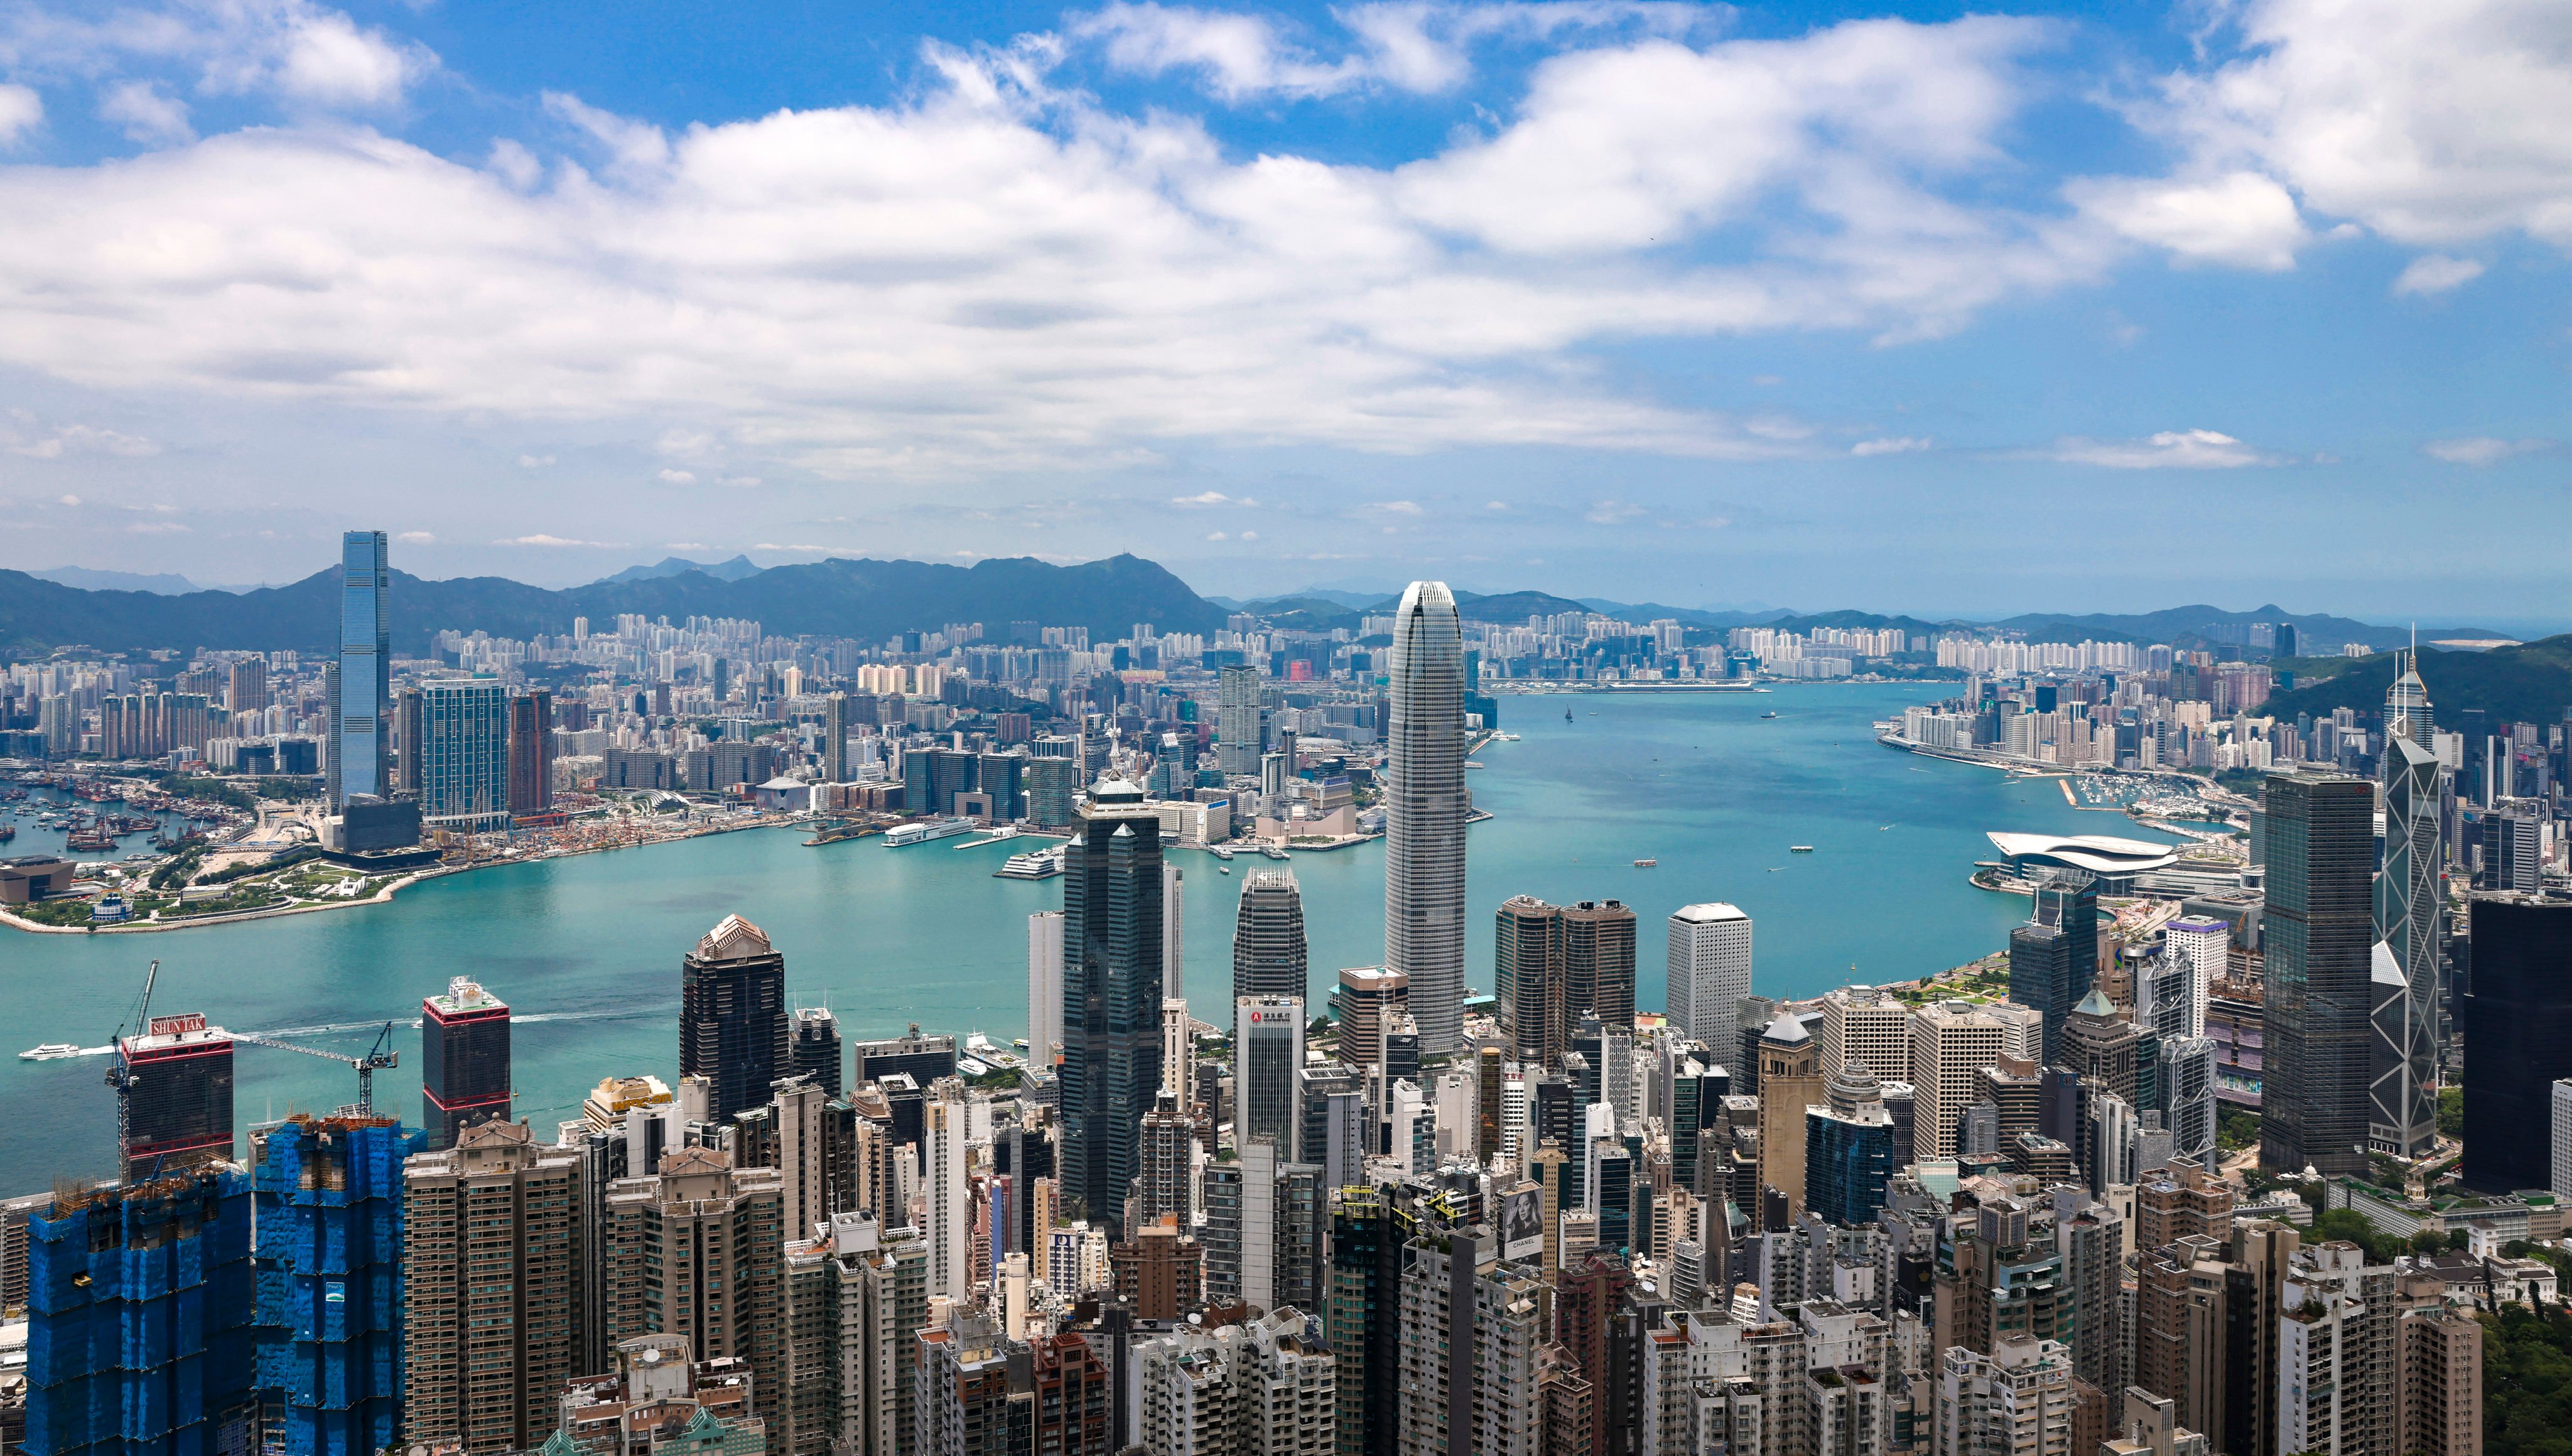 The British Chamber of Commerce in Hong Kong will hold its annual summit in mid-October. Photo: K. Y. Cheng